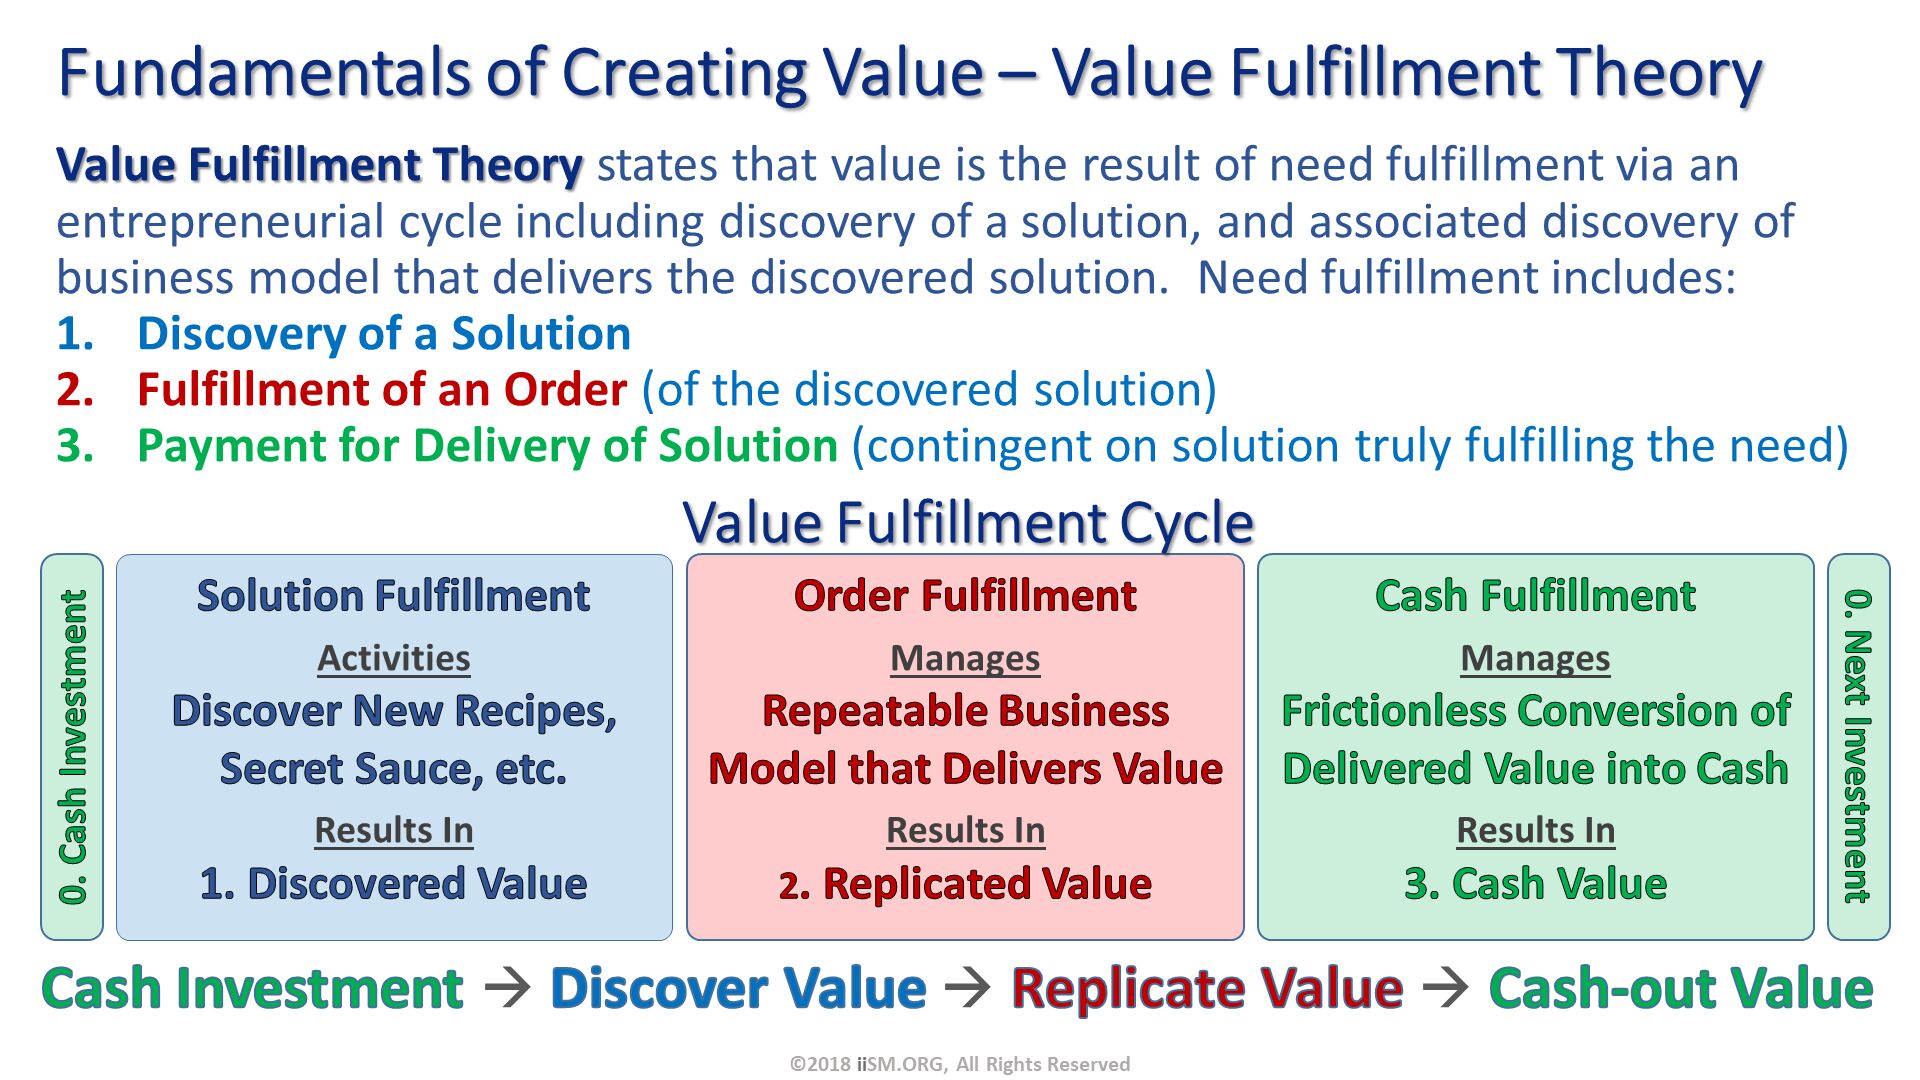 Fundamentals of Creating Value – Value Fulfillment Theory. ©2018 iiSM.ORG, All Rights Reserved. Value Fulfillment Theory states that value is the result of need fulfillment via an entrepreneurial cycle including discovery of a solution, and associated discovery of business model that delivers the discovered solution.  Need fulfillment includes:
Discovery of a Solution
Fulfillment of an Order (of the discovered solution)
Payment for Delivery of Solution (contingent on solution truly fulfilling the need). Cash Investment  Discover Value  Replicate Value  Cash-out Value. Value Fulfillment Cycle. 